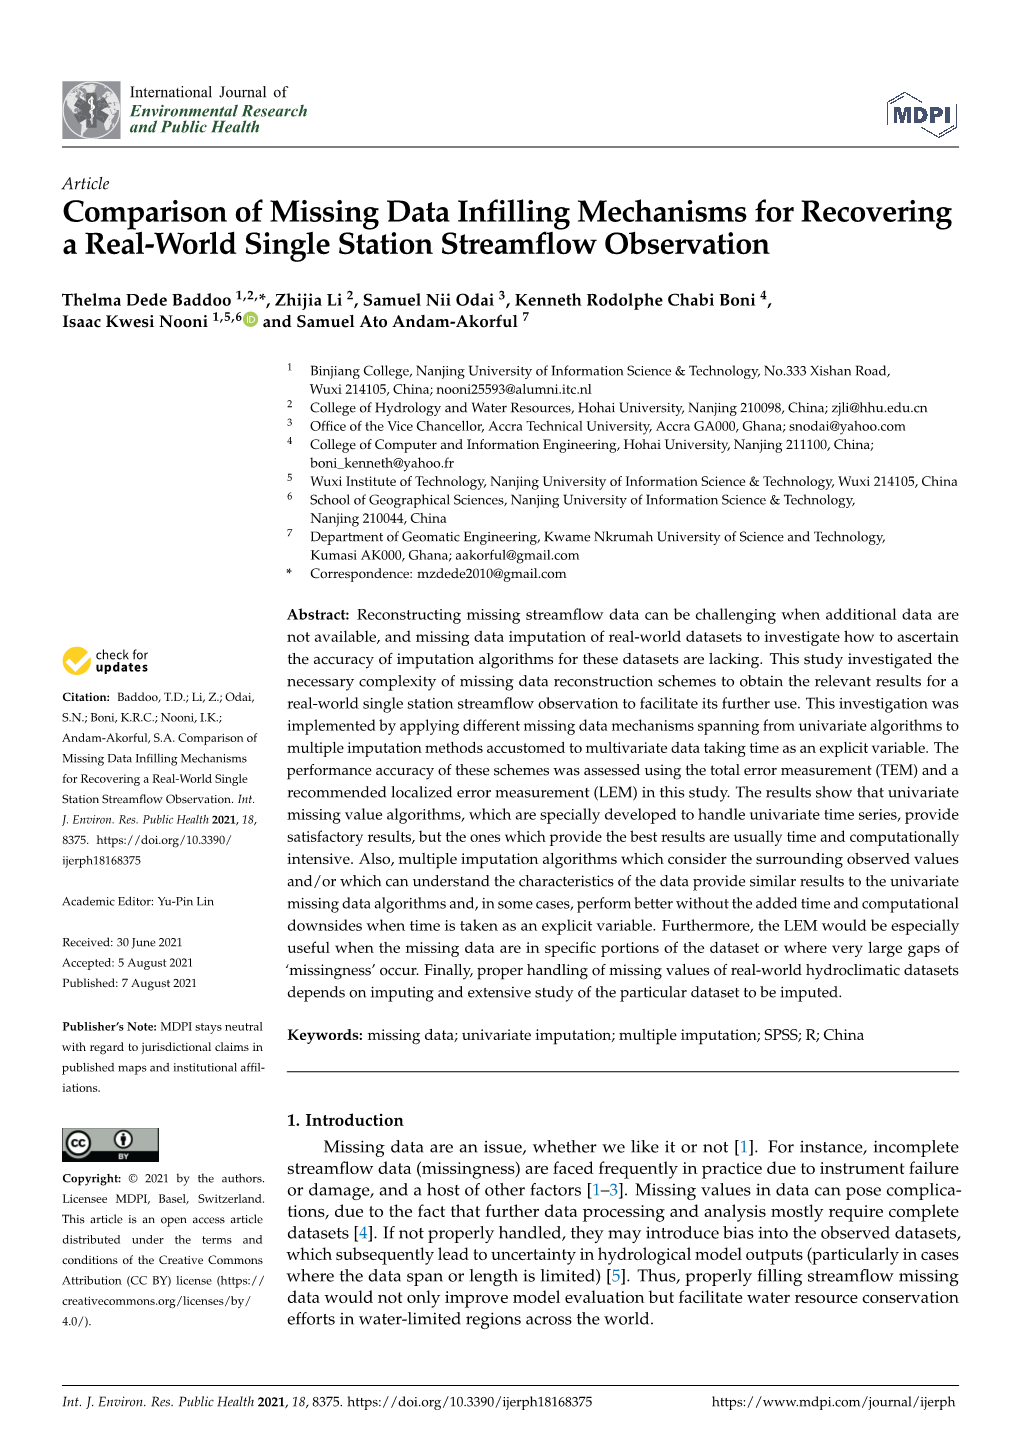 Comparison of Missing Data Infilling Mechanisms for Recovering a Real-World Single Station Streamflow Observation